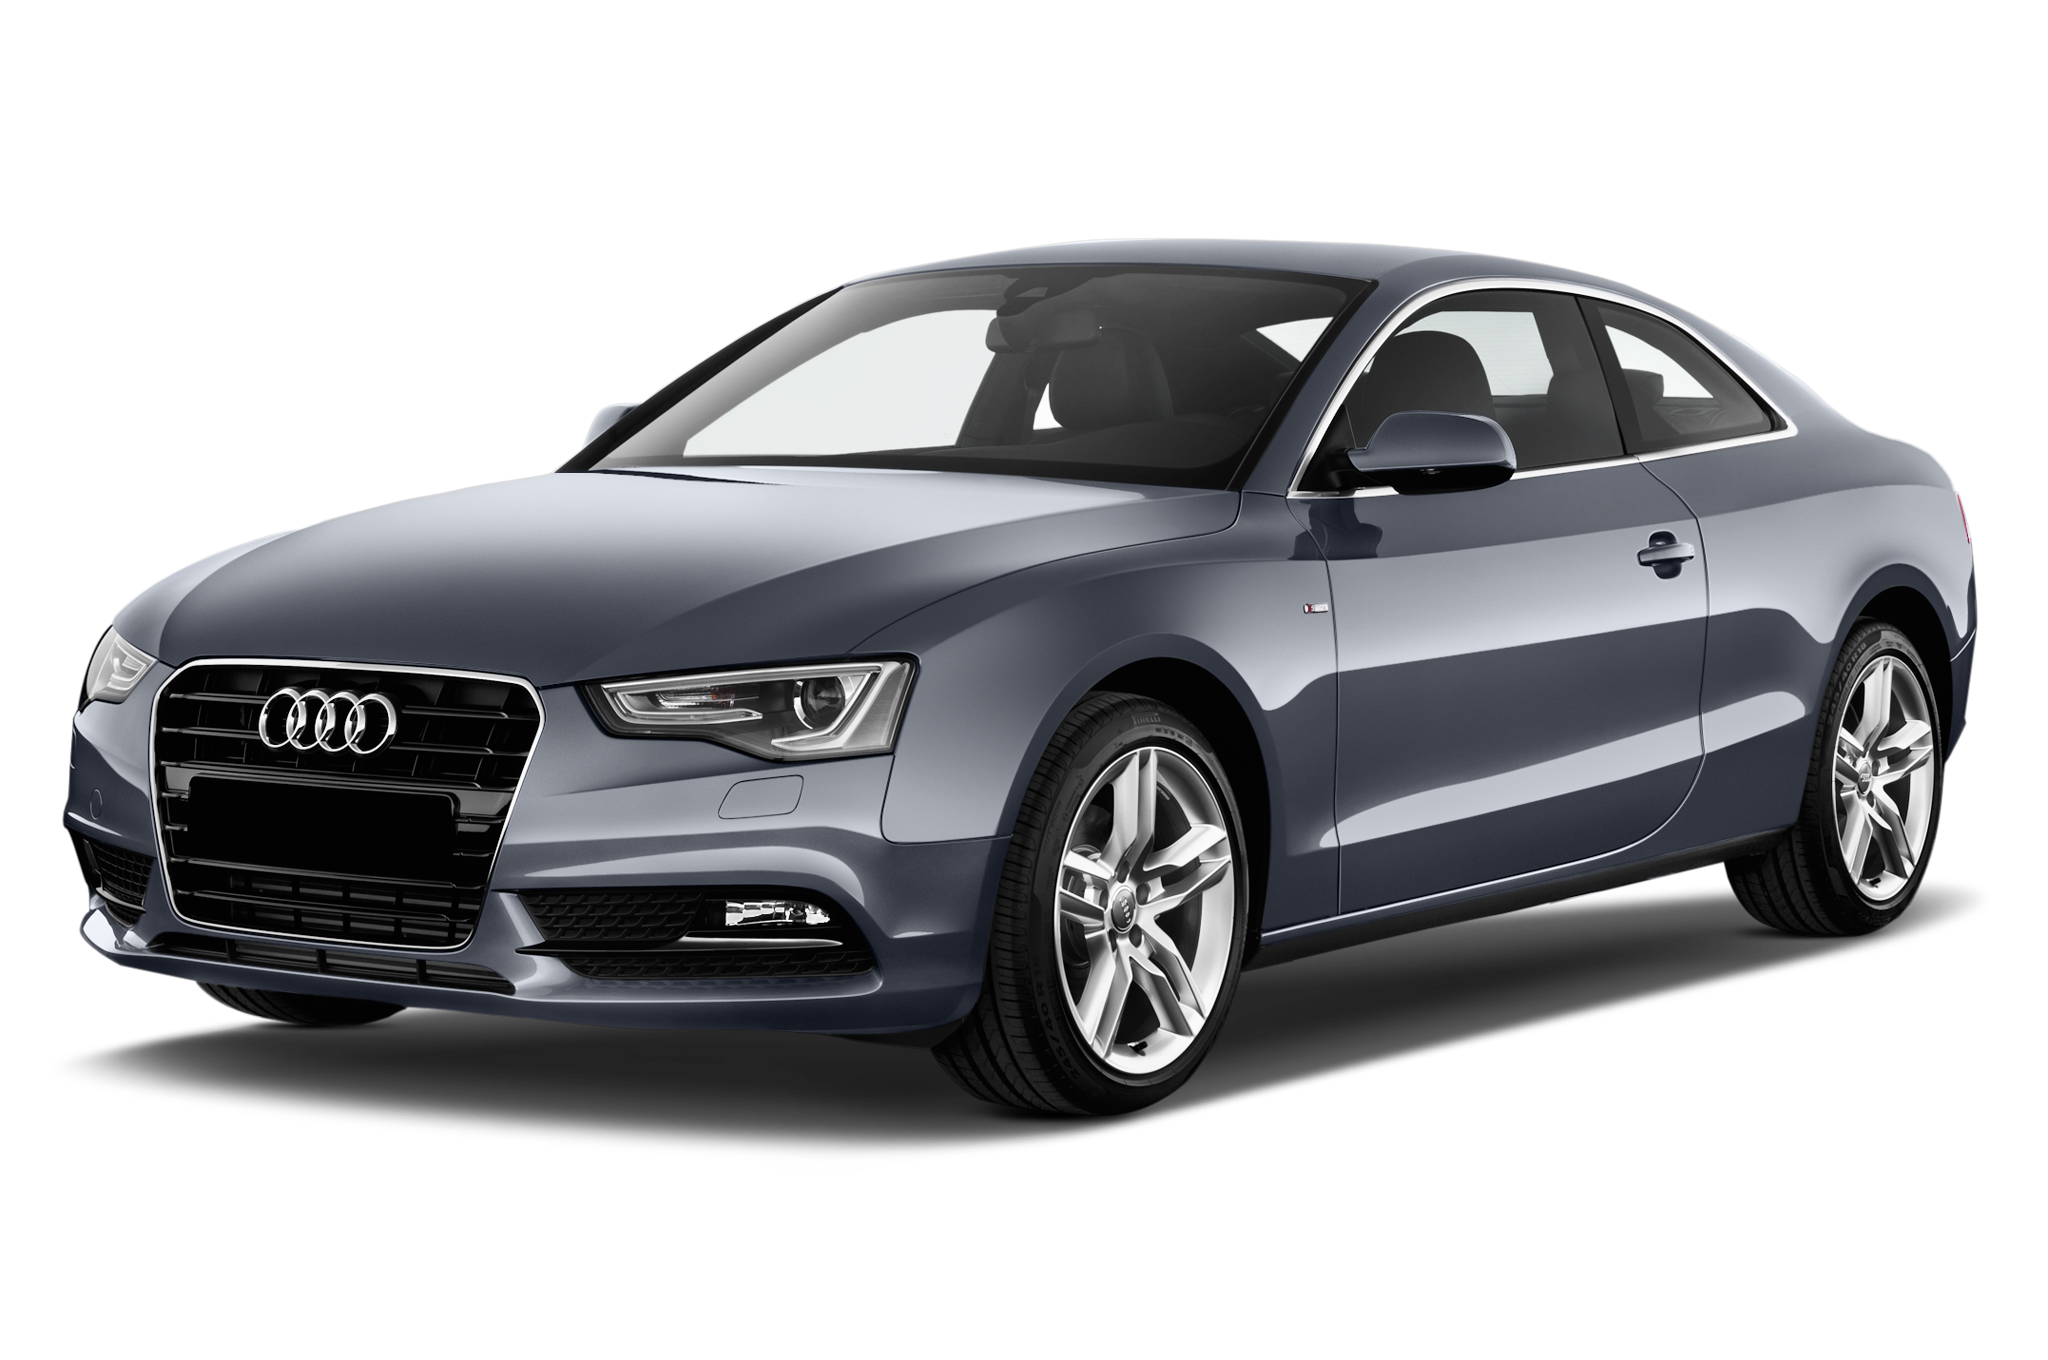 How To Rent A Audi A5 Coupe In Dubai